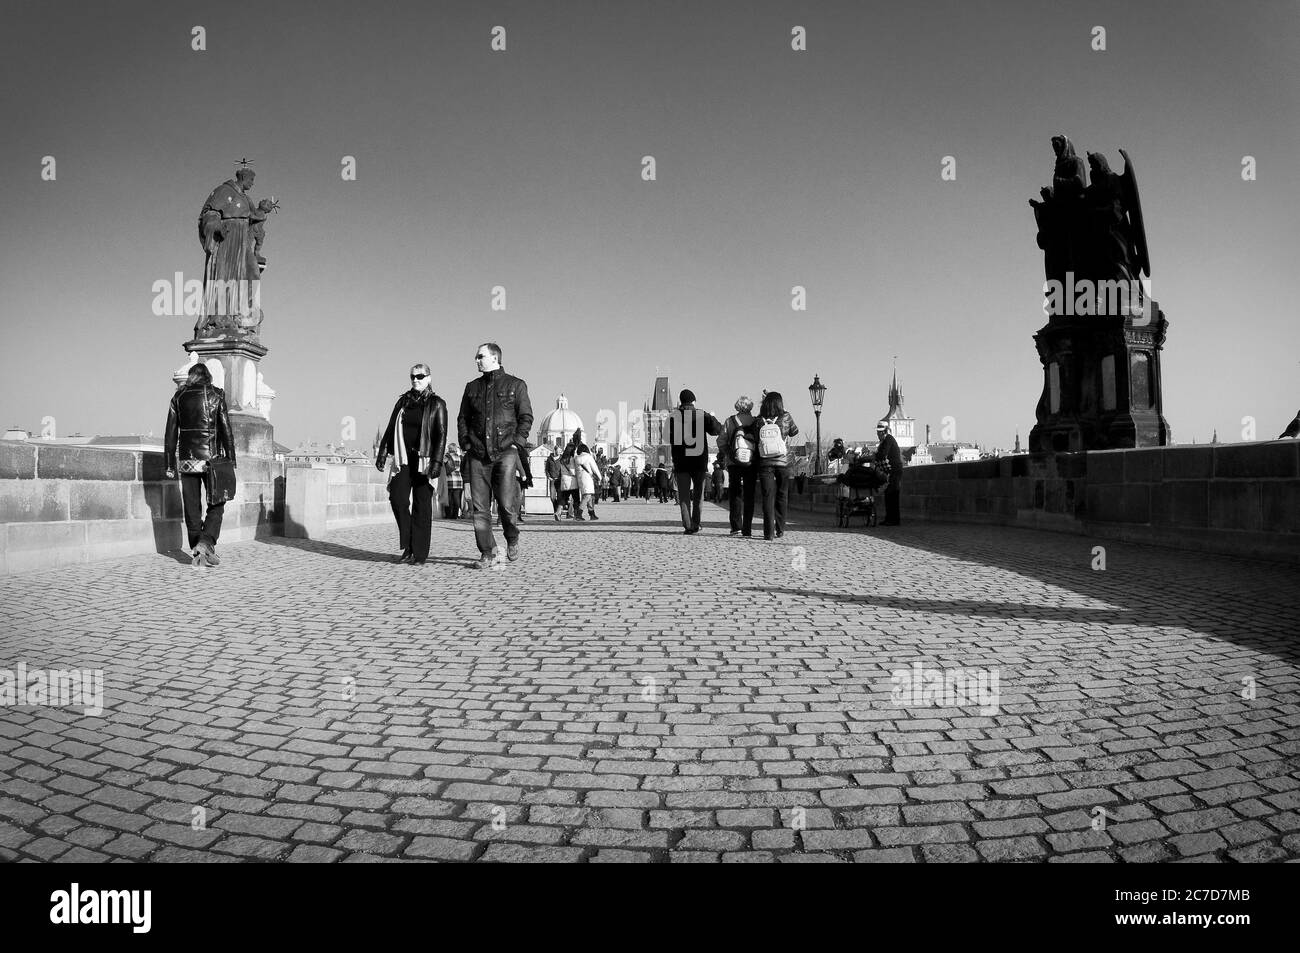 People crossing the Charles Bridge in the city of Prague, the capital city of the Czech Republic. Stock Photo